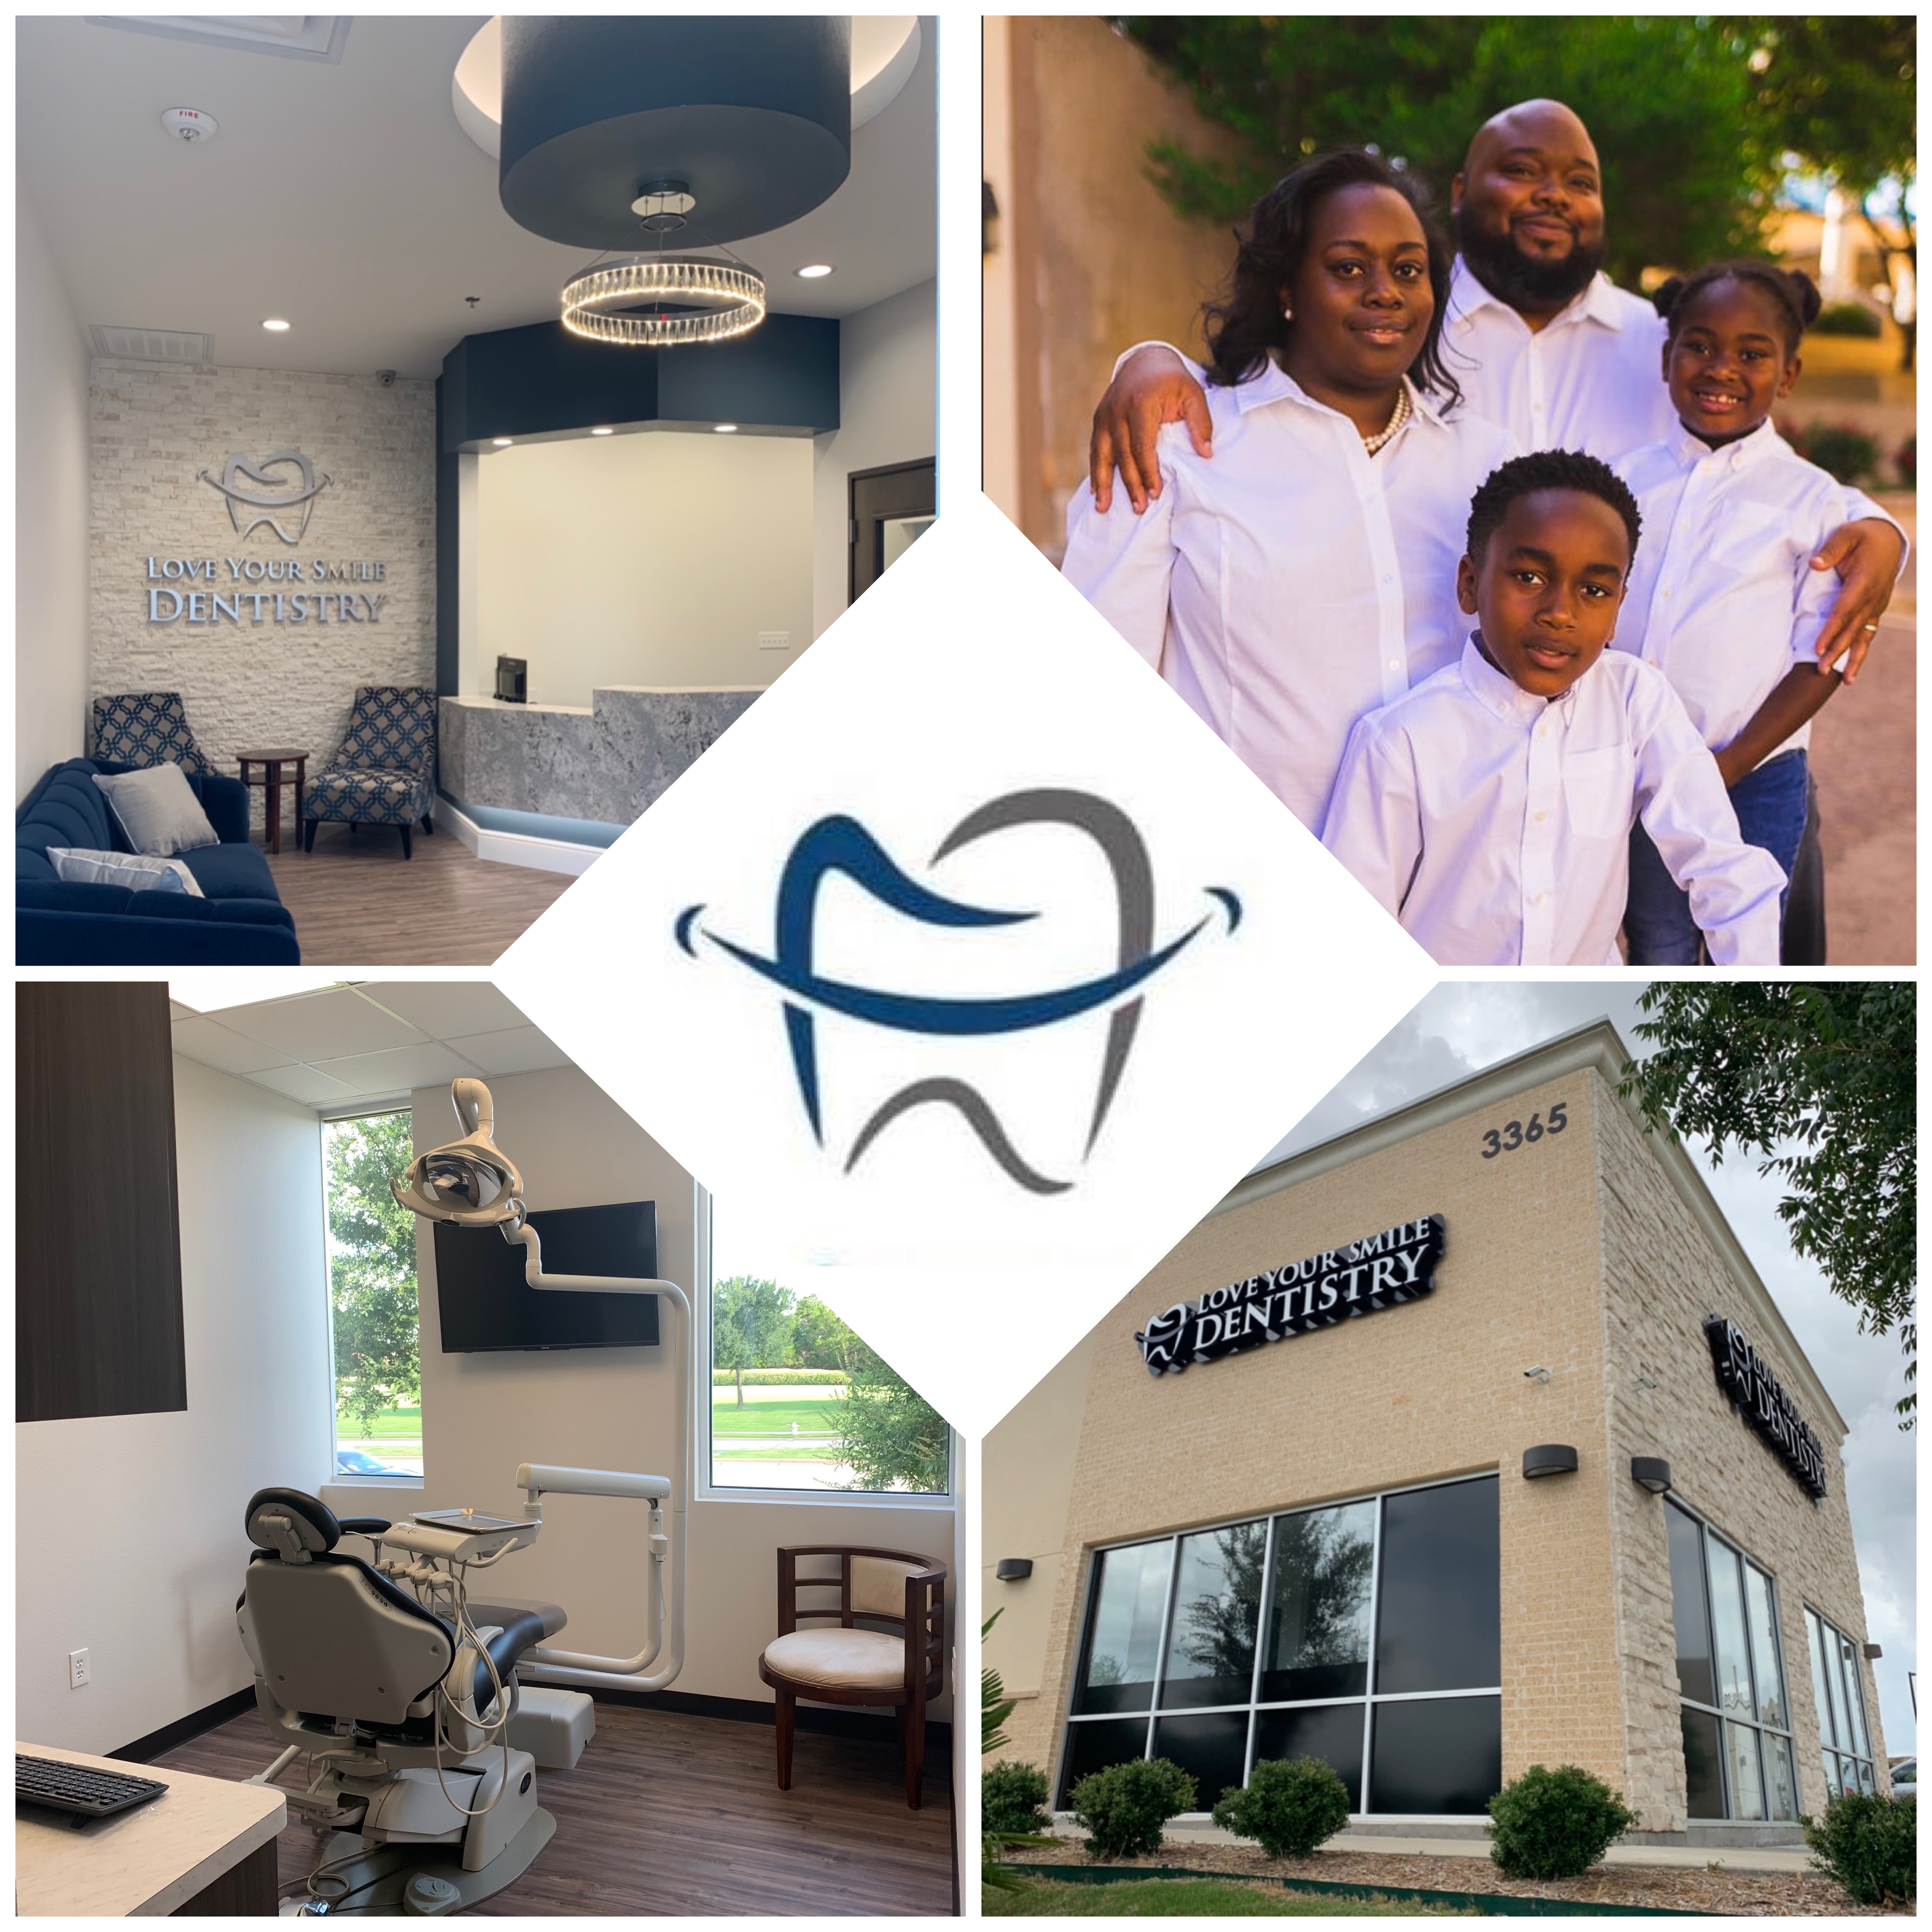 Love Your Smile Dentistry - Black Owned Dental Practices